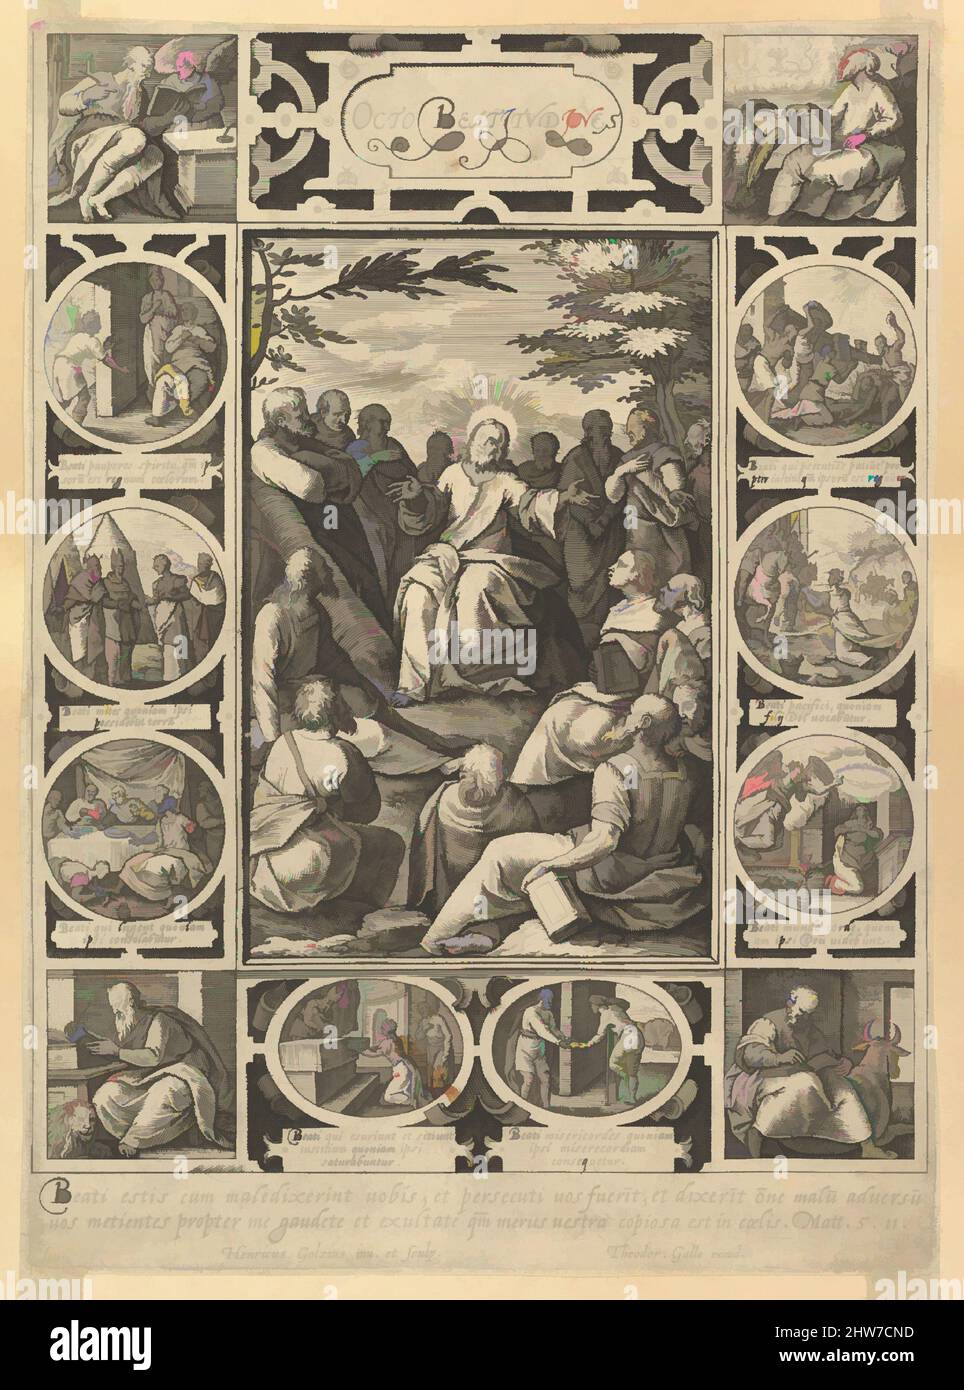 Art inspired by The Eight Beatitudes, from Christian and Profane Allegories, Engraving, sheet: 10 1/16 x 7 5/16 in. (25.5 x 18.6 cm), Prints, Hendrick Goltzius (Netherlandish, Mühlbracht 1558–1617 Haarlem, Classic works modernized by Artotop with a splash of modernity. Shapes, color and value, eye-catching visual impact on art. Emotions through freedom of artworks in a contemporary way. A timeless message pursuing a wildly creative new direction. Artists turning to the digital medium and creating the Artotop NFT Stock Photo